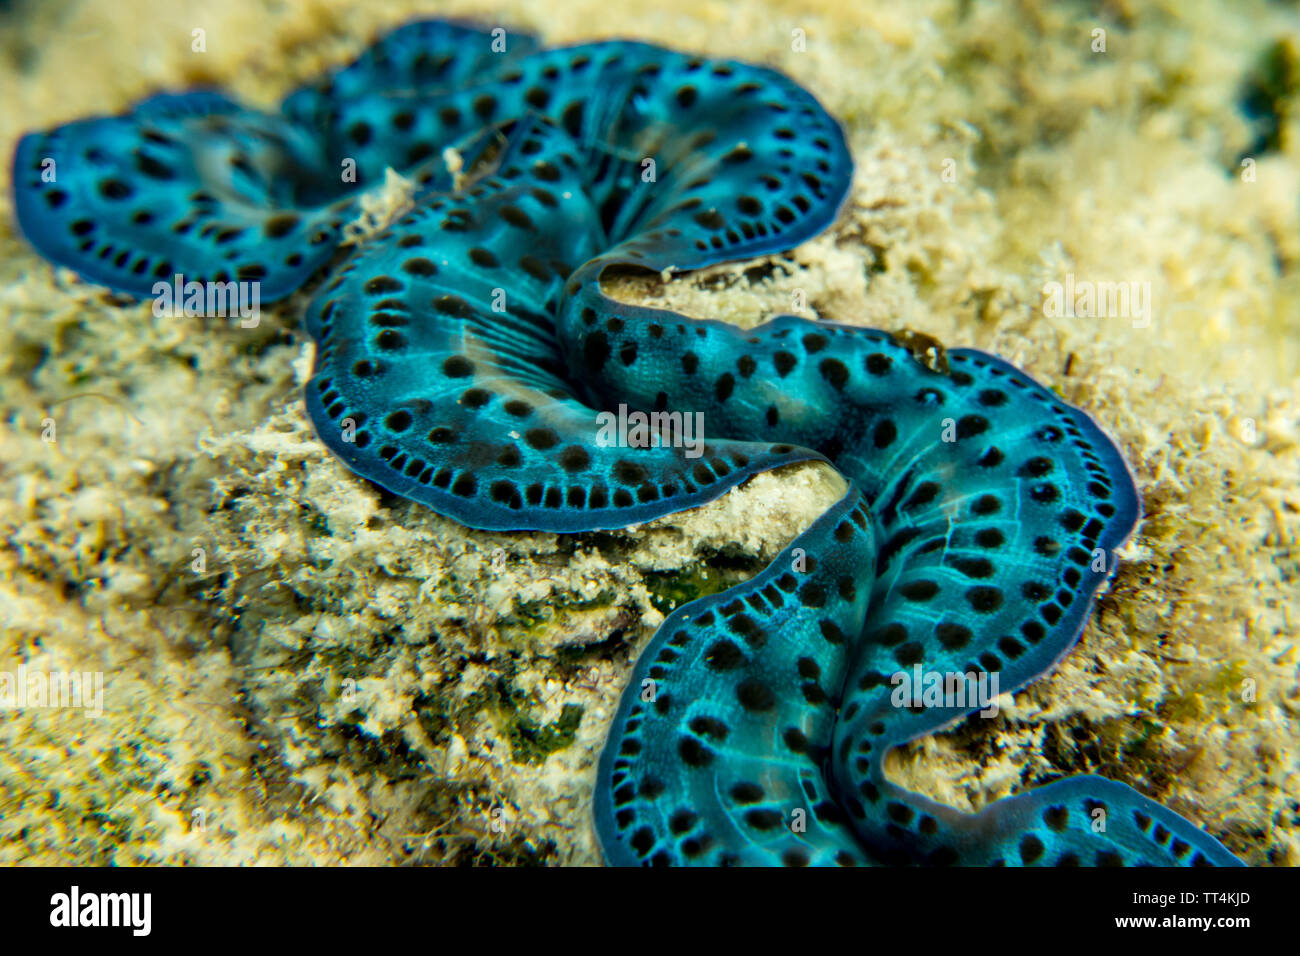 Tridacna clam of with brilliant blue mantle in the shallows of Huahine Island, French Polynesia Stock Photo